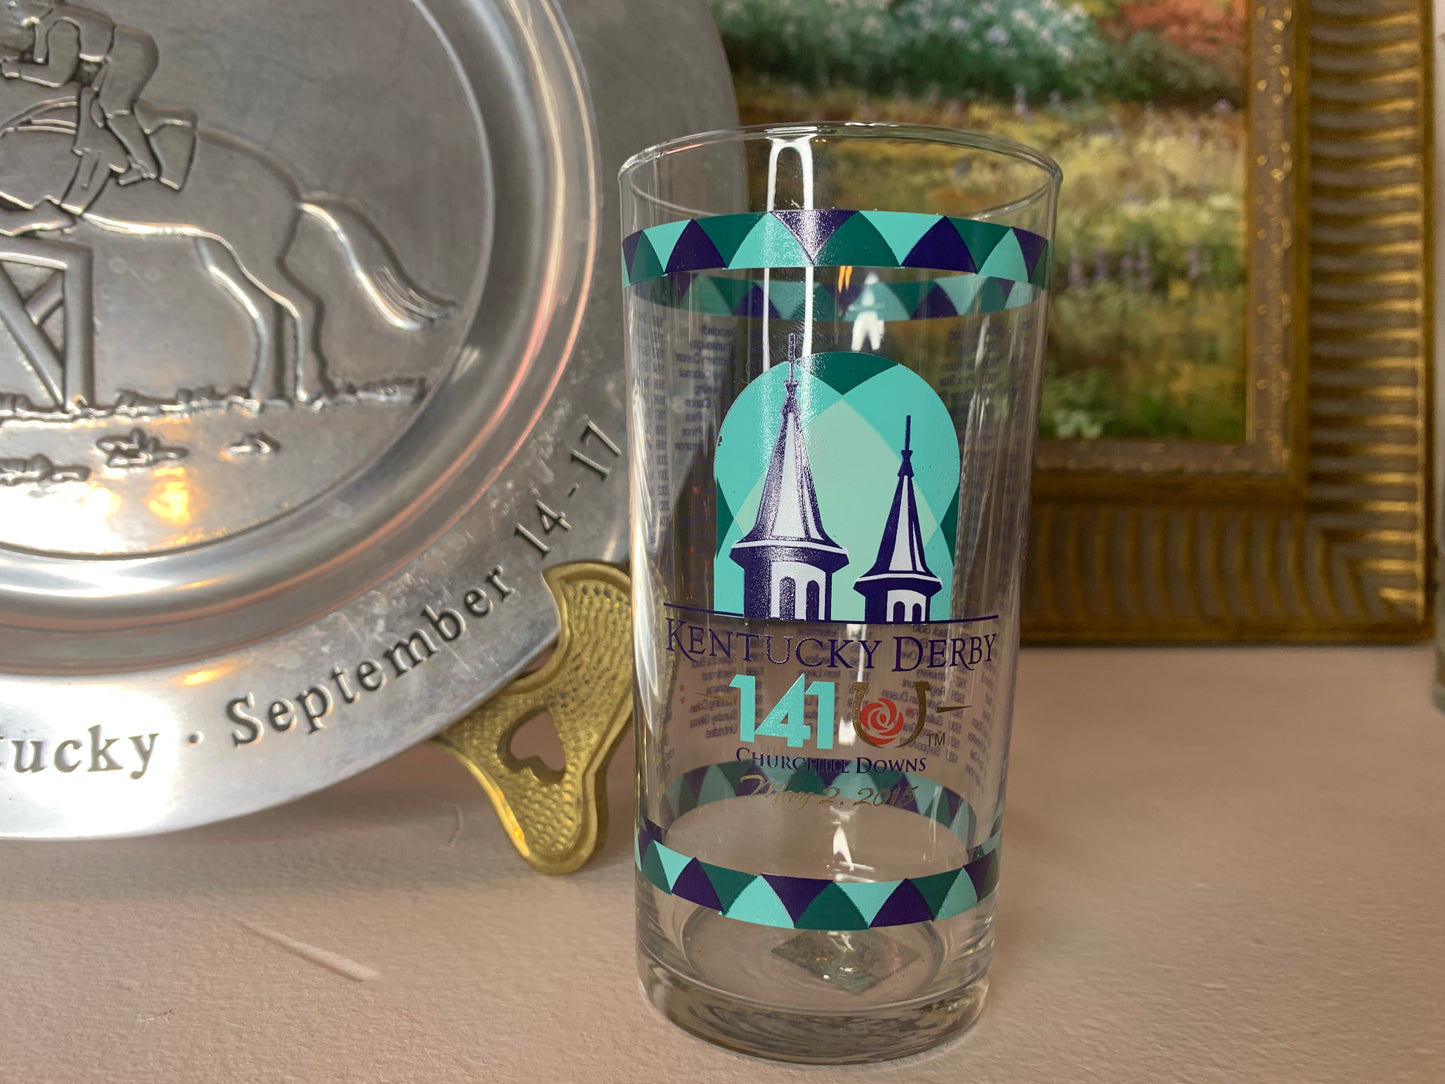 Kentucky Derby glasses set of 3 - Excellent condition!